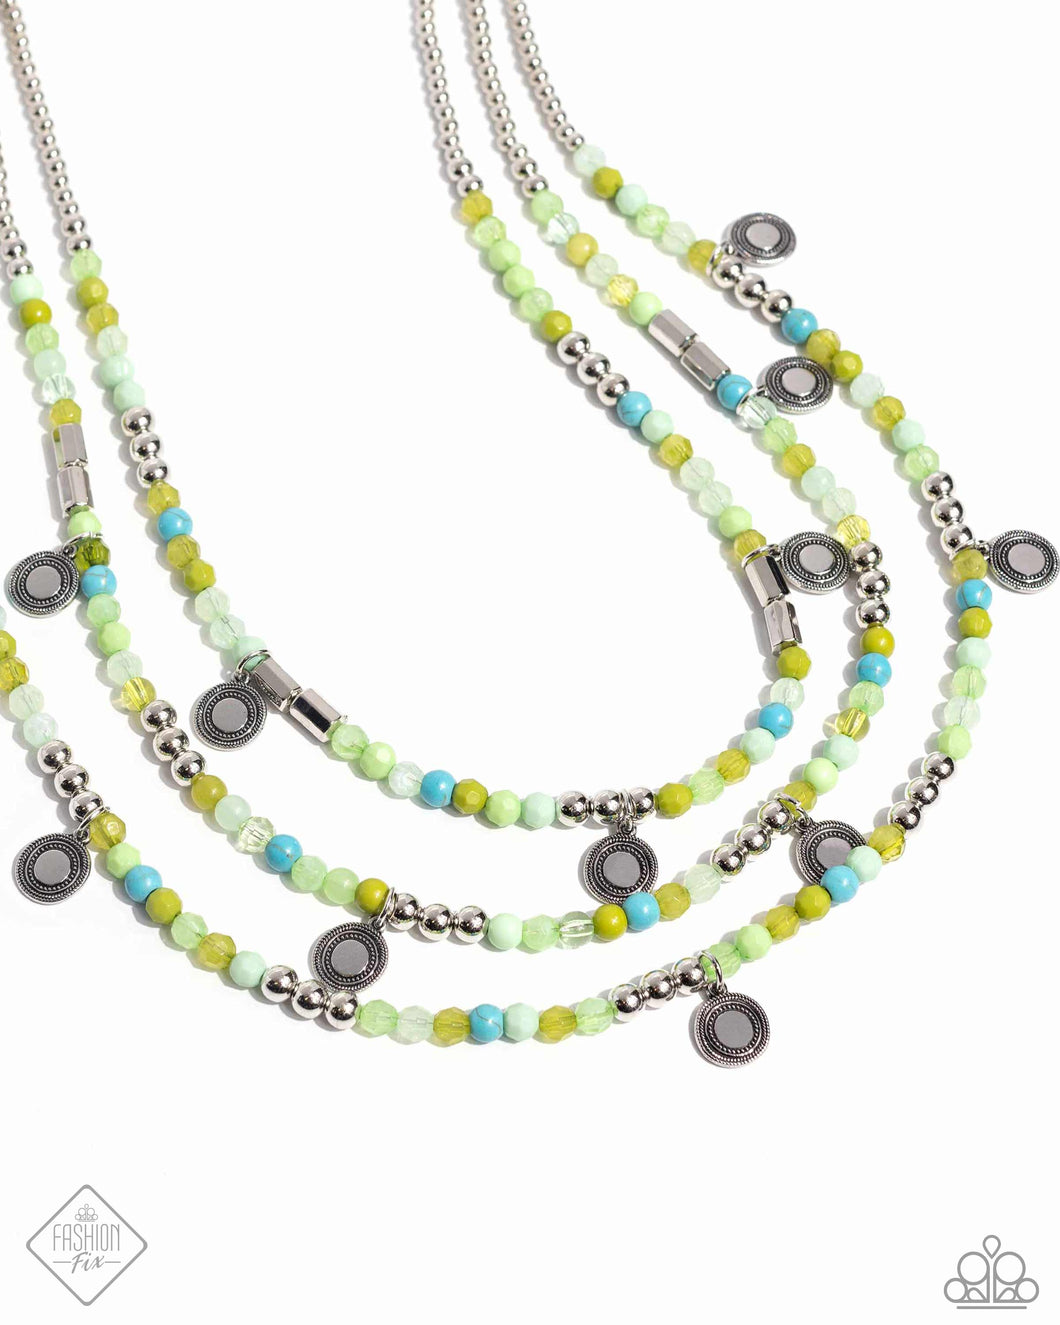 Piquant Pattern - Green Necklace (SSF-0424)